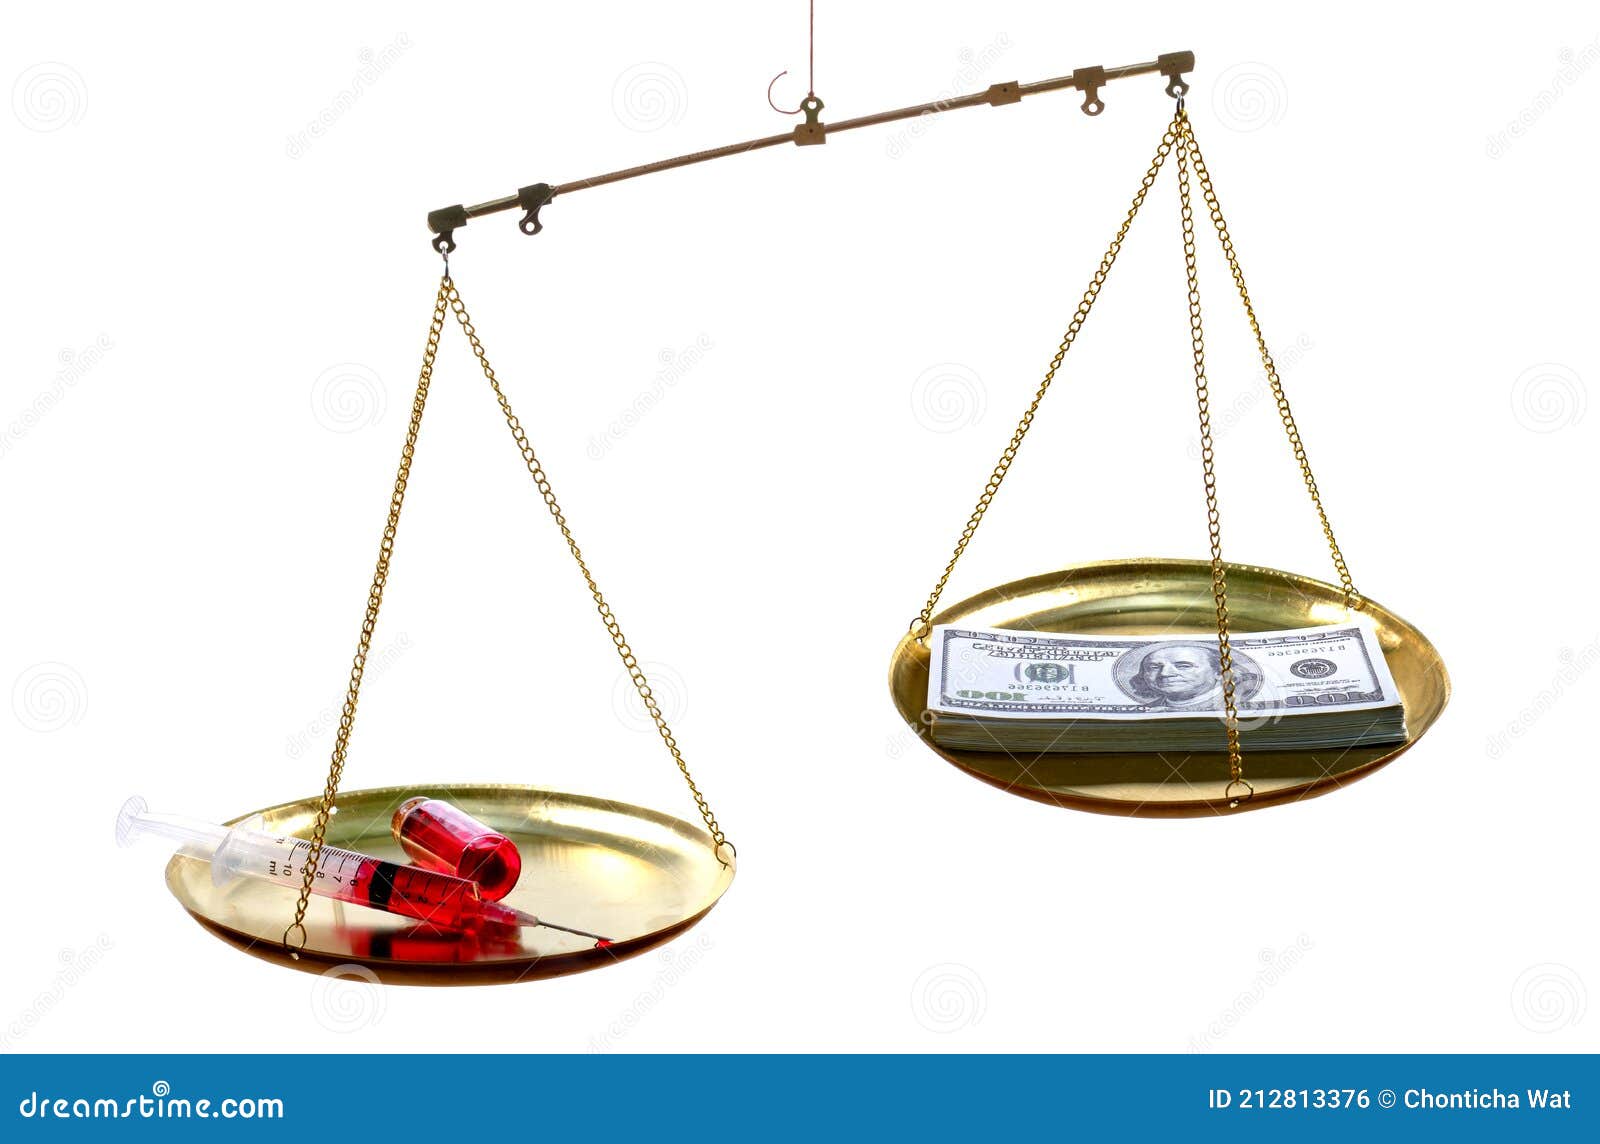 https://thumbs.dreamstime.com/z/scales-medicine-syringe-one-side-money-banknote-usd-other-white-background-expensive-treatment-concept-212813376.jpg